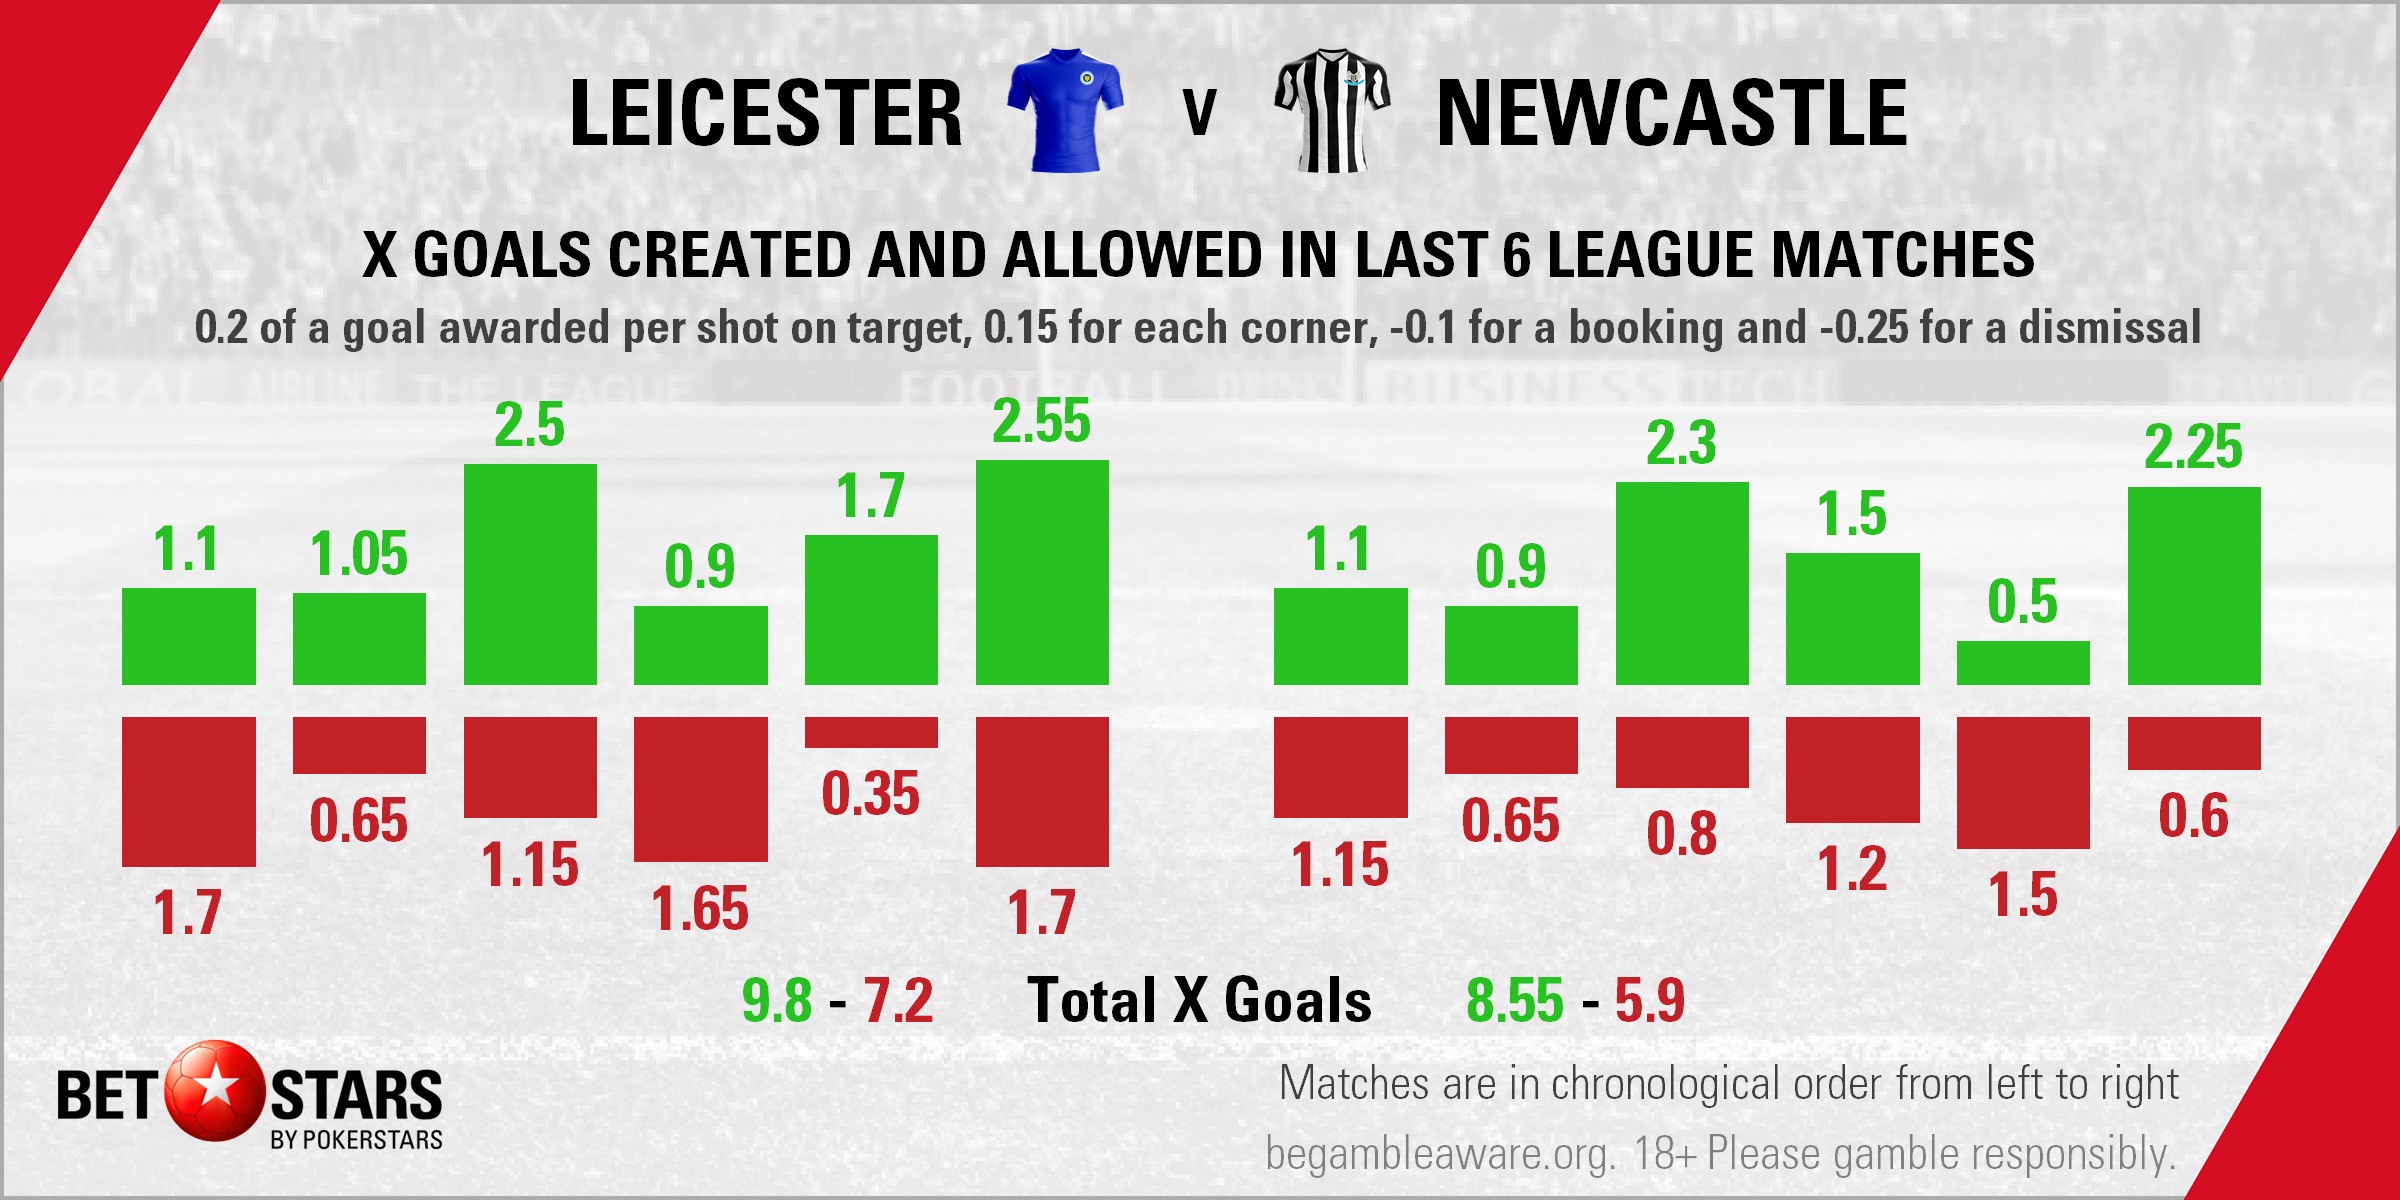 Leicester vs Newcastle: Rodgers' run to continue at Magpies' expense